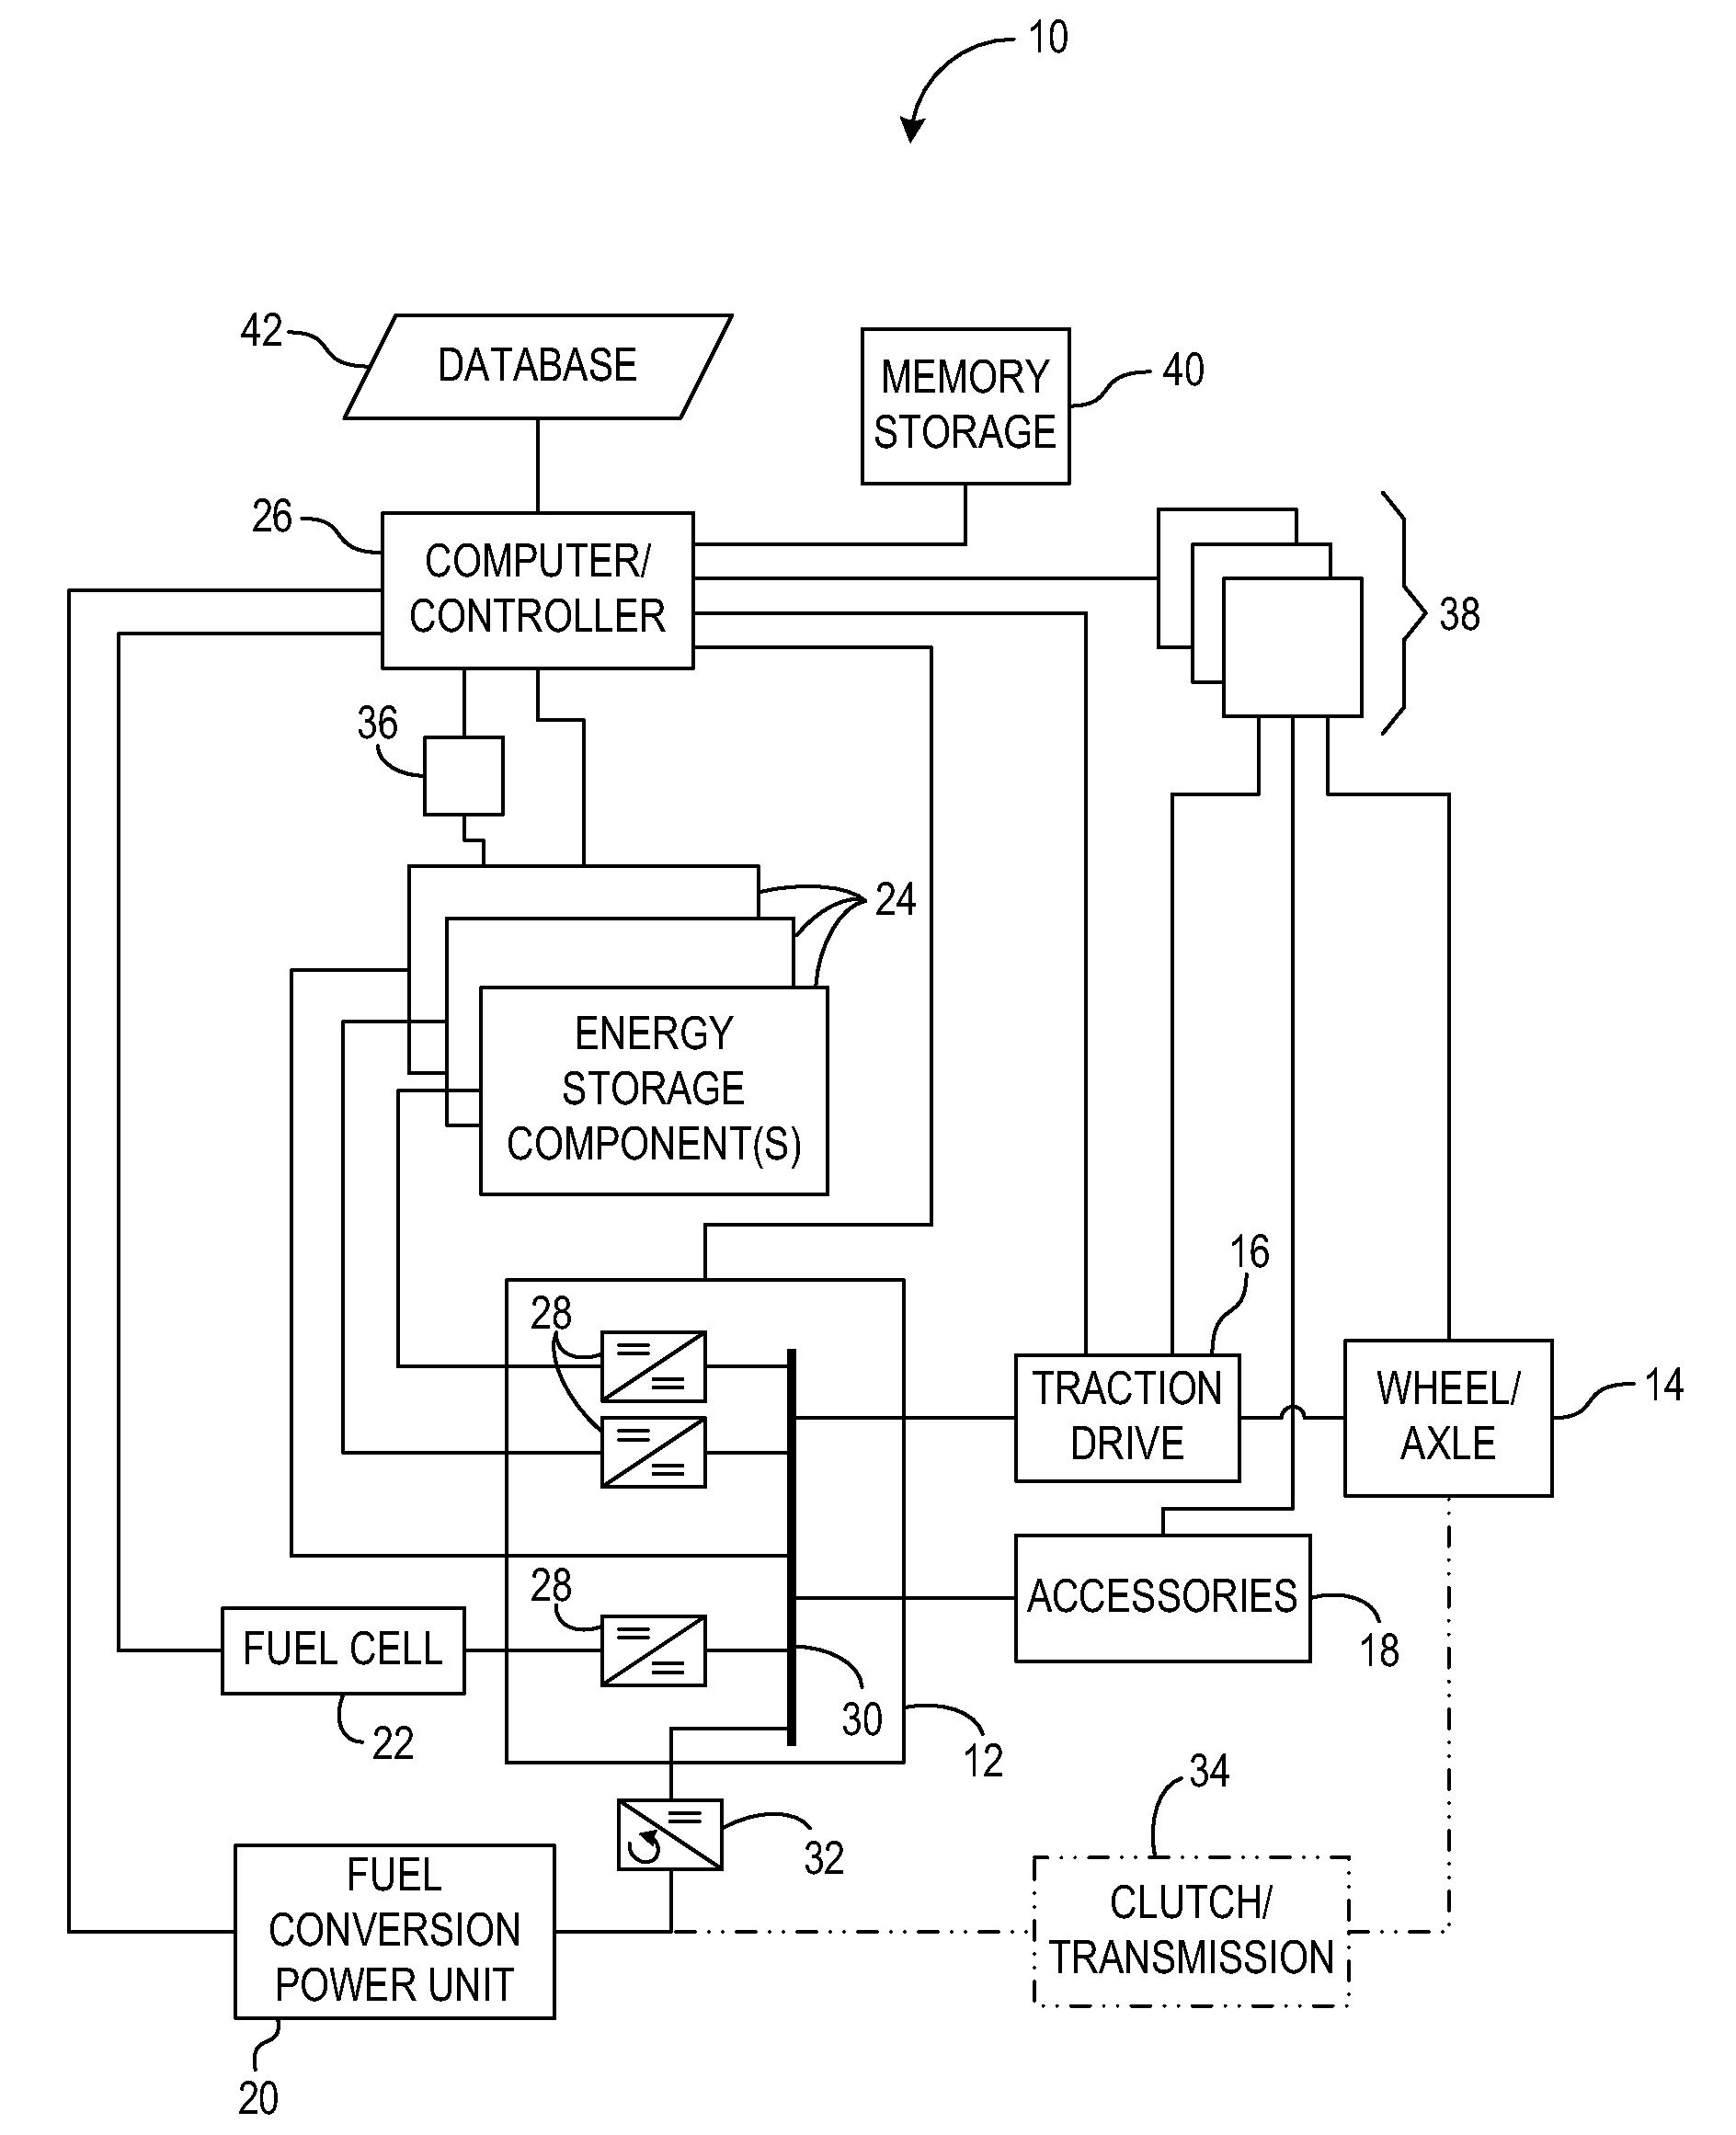 System and method for optimizing energy storage component usage